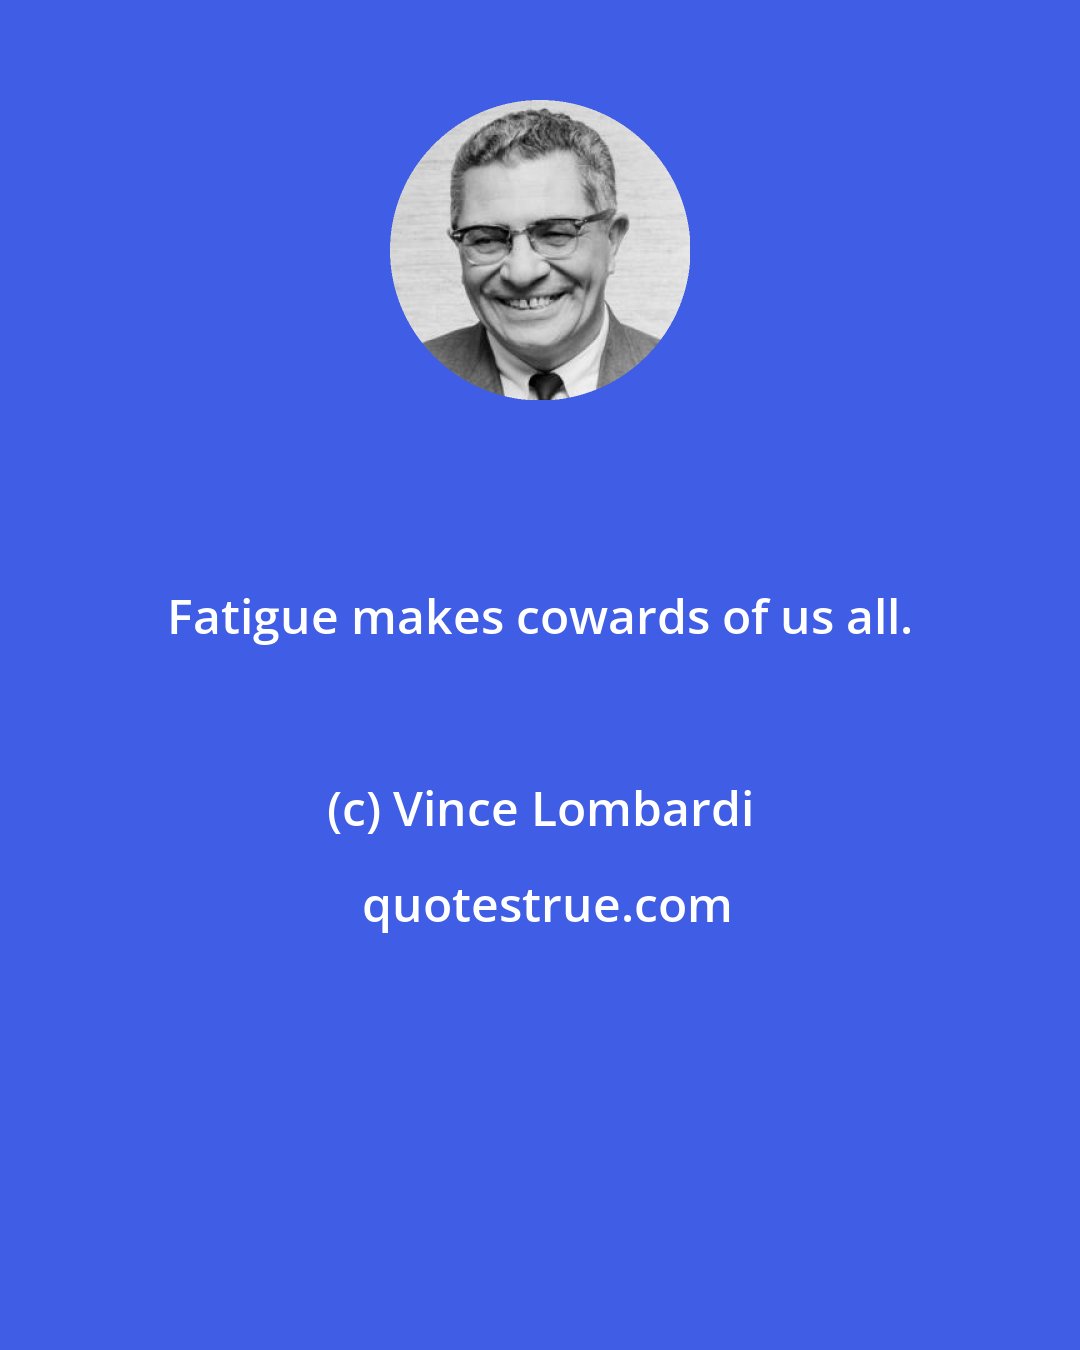 Vince Lombardi: Fatigue makes cowards of us all.